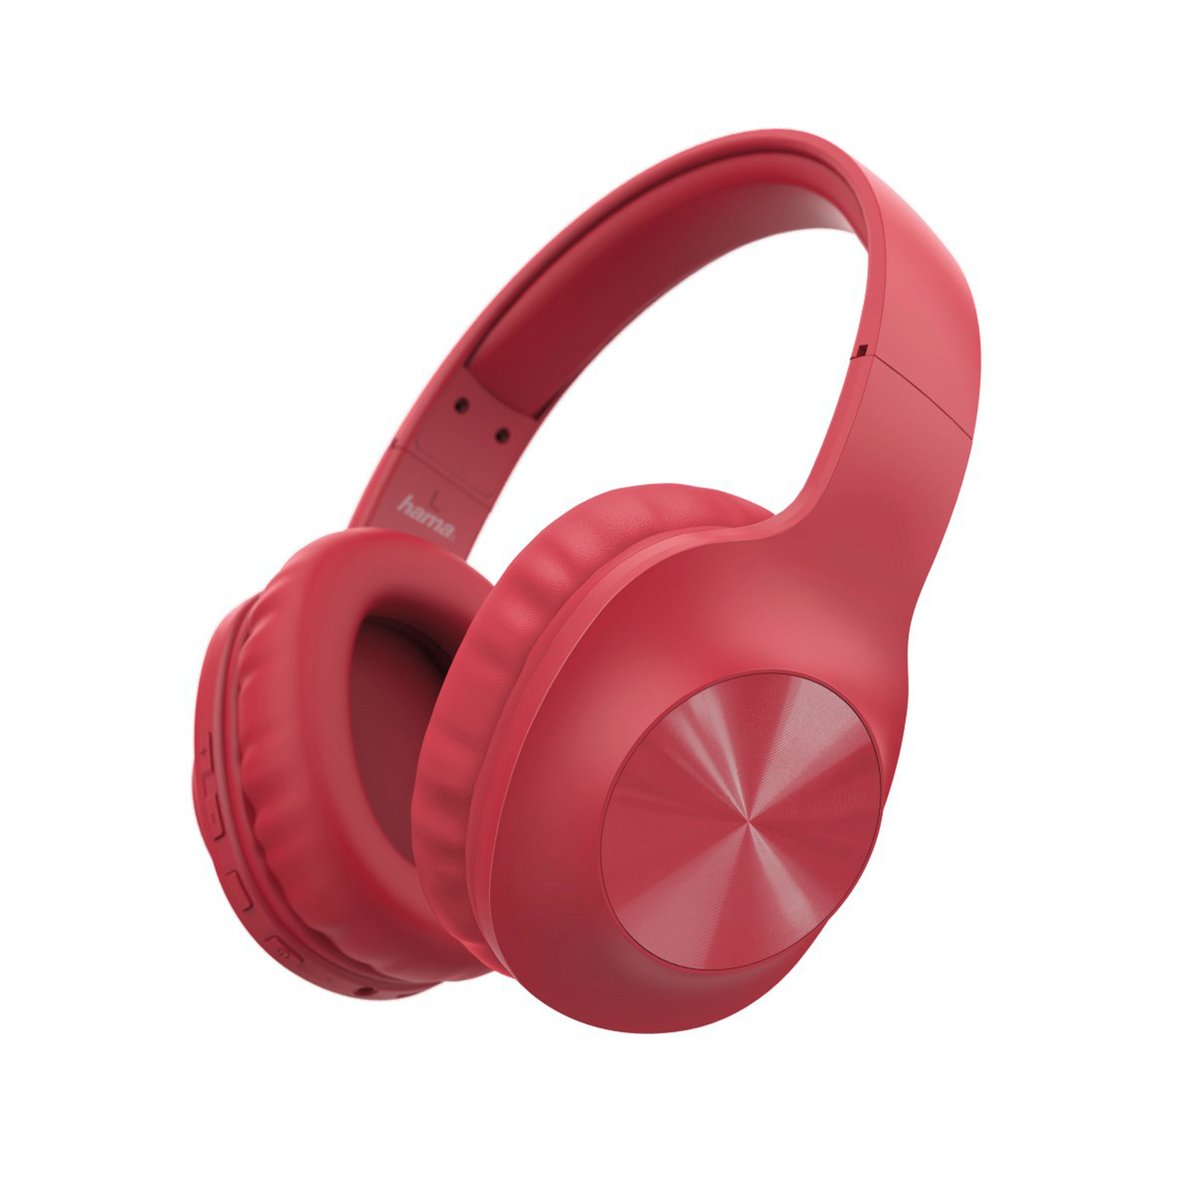 Hama Calypso Bluetooth headphones (184060), over-ear, microphone, bass booster, Red